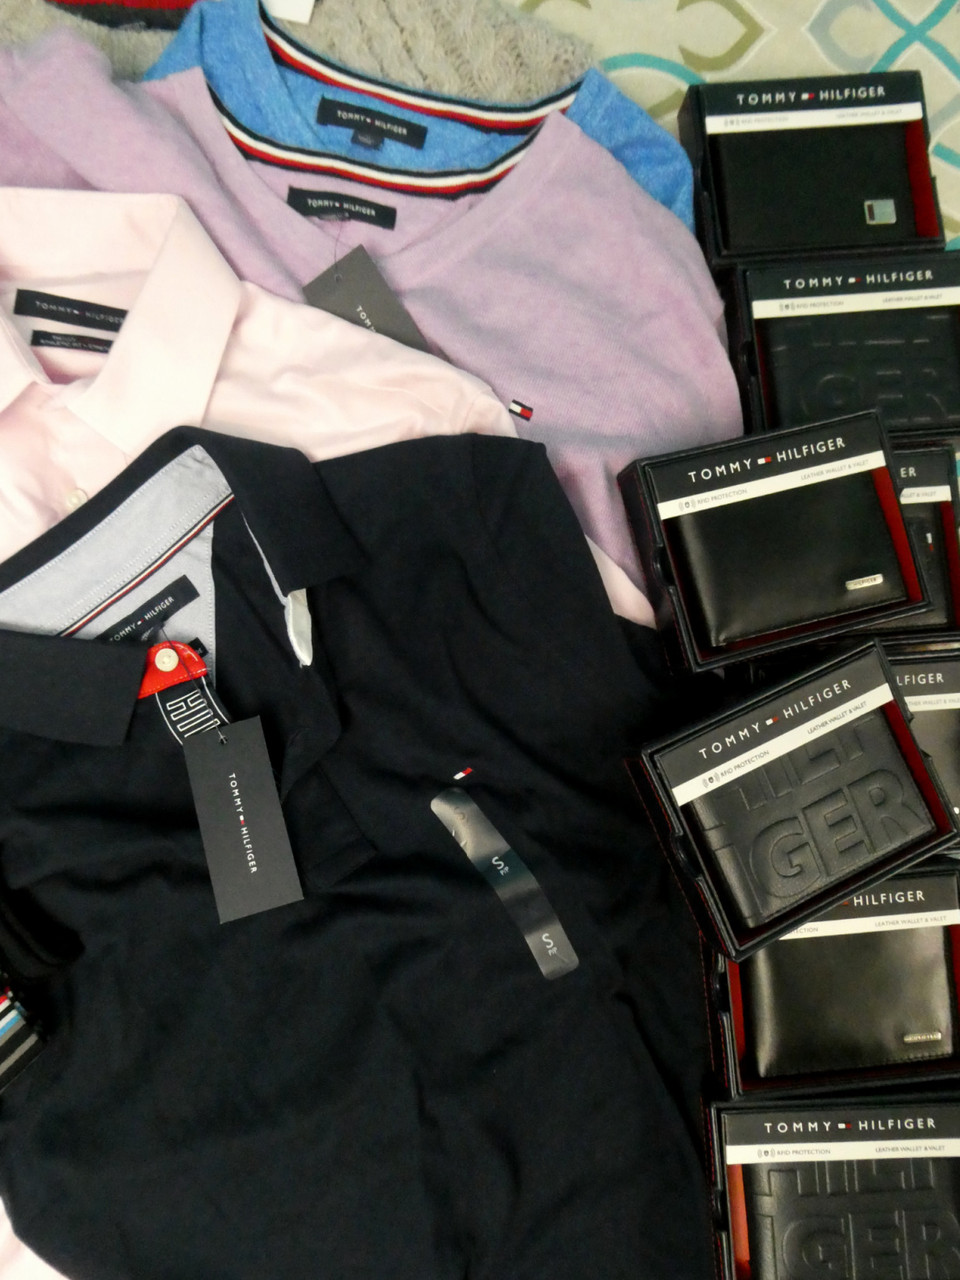 wholesale tommy hilfiger clothing